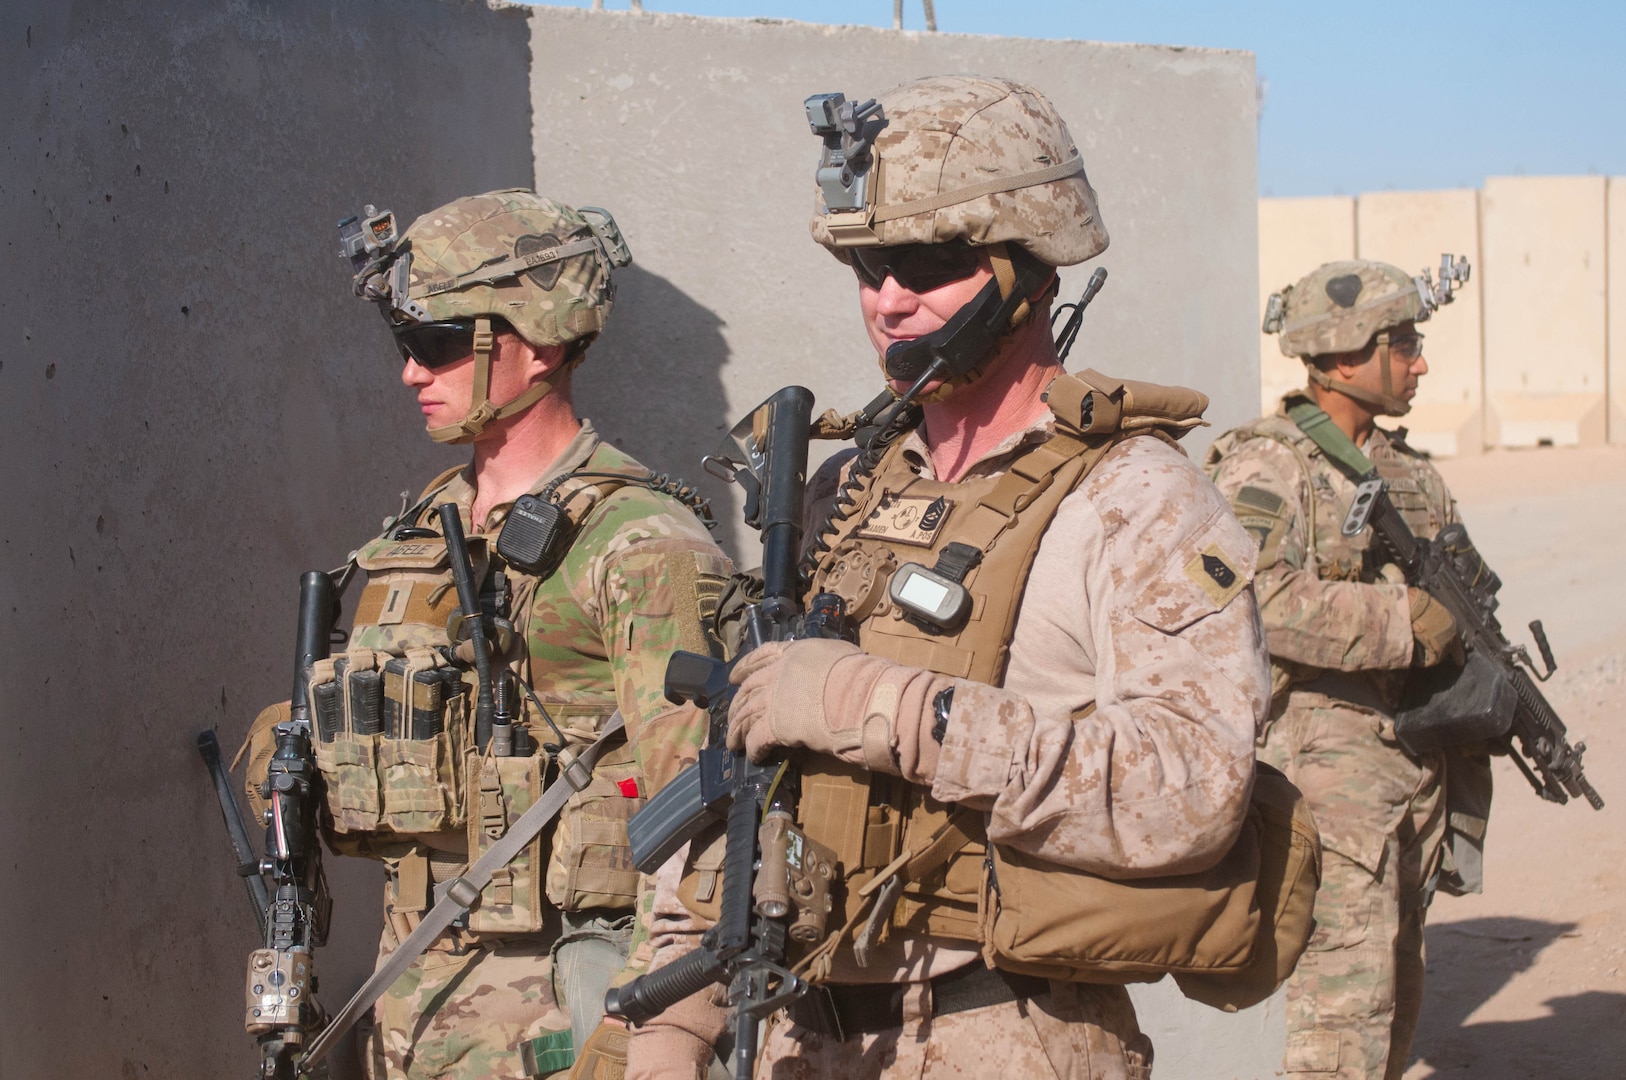 U.S Army 1st Lt. Patrick Abele, left, 1st Squadron, 75th Cavalry Regiment, Task Force Strike, and U.S. Marine Corps Master Sgt. Travis Madden , right, Special Purpose Marine Air Ground Task Force – Crisis Response – Central Command, monitor the status of a joint United States Army and United States Marine Corps readiness drill, Qayyarah West Airfield, Iraq,  Nov. 17 2016. Readiness drills provide Coalition forces with opportunities to assess their preparation and response time as they work to advise and assist the Iraqi security forces during Operation Inherent Resolve.  Coalition forces operate out of Qayyarah West Airfield where they advise and assist the Iraqi security forces as they fight to retake territory from the Islamic State of Iraq and the Levant. (U.S. Army photo by 1st Lt. Daniel Johnson)